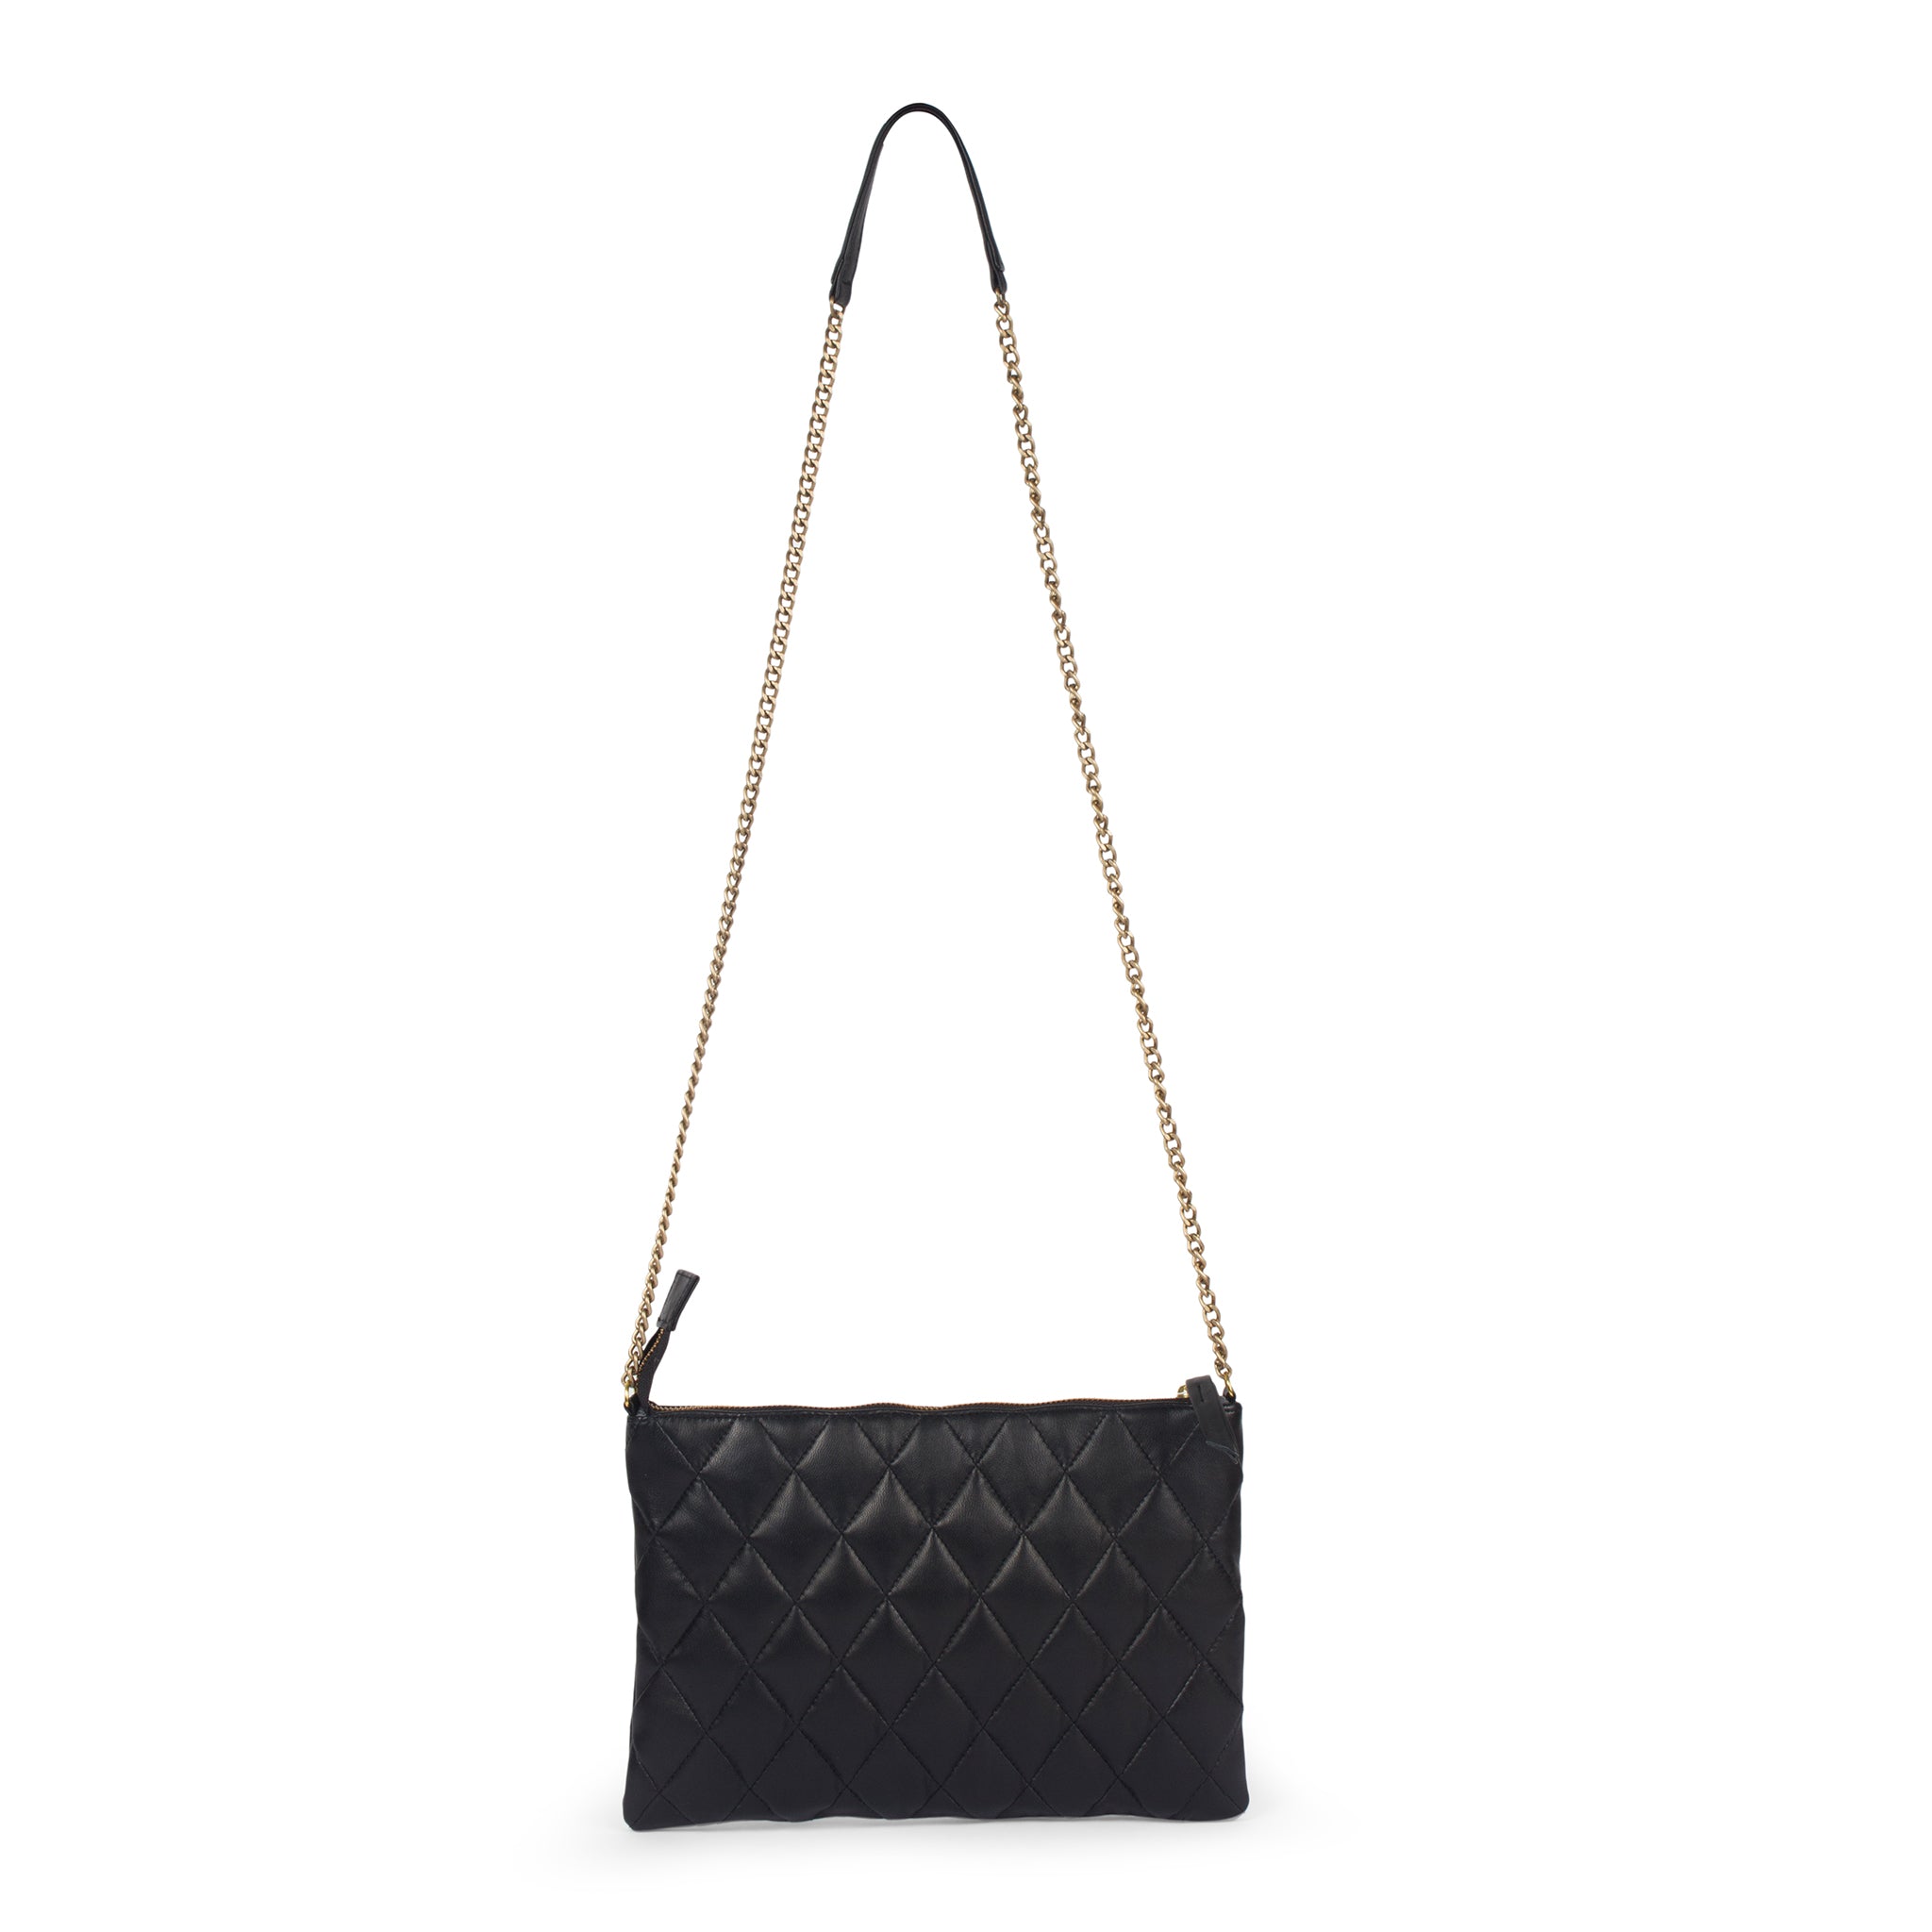 Before & Ever Small Purse - Quilted Black Crossbody Bag for Women - Gold Chain Clutch Purse Bag for Women